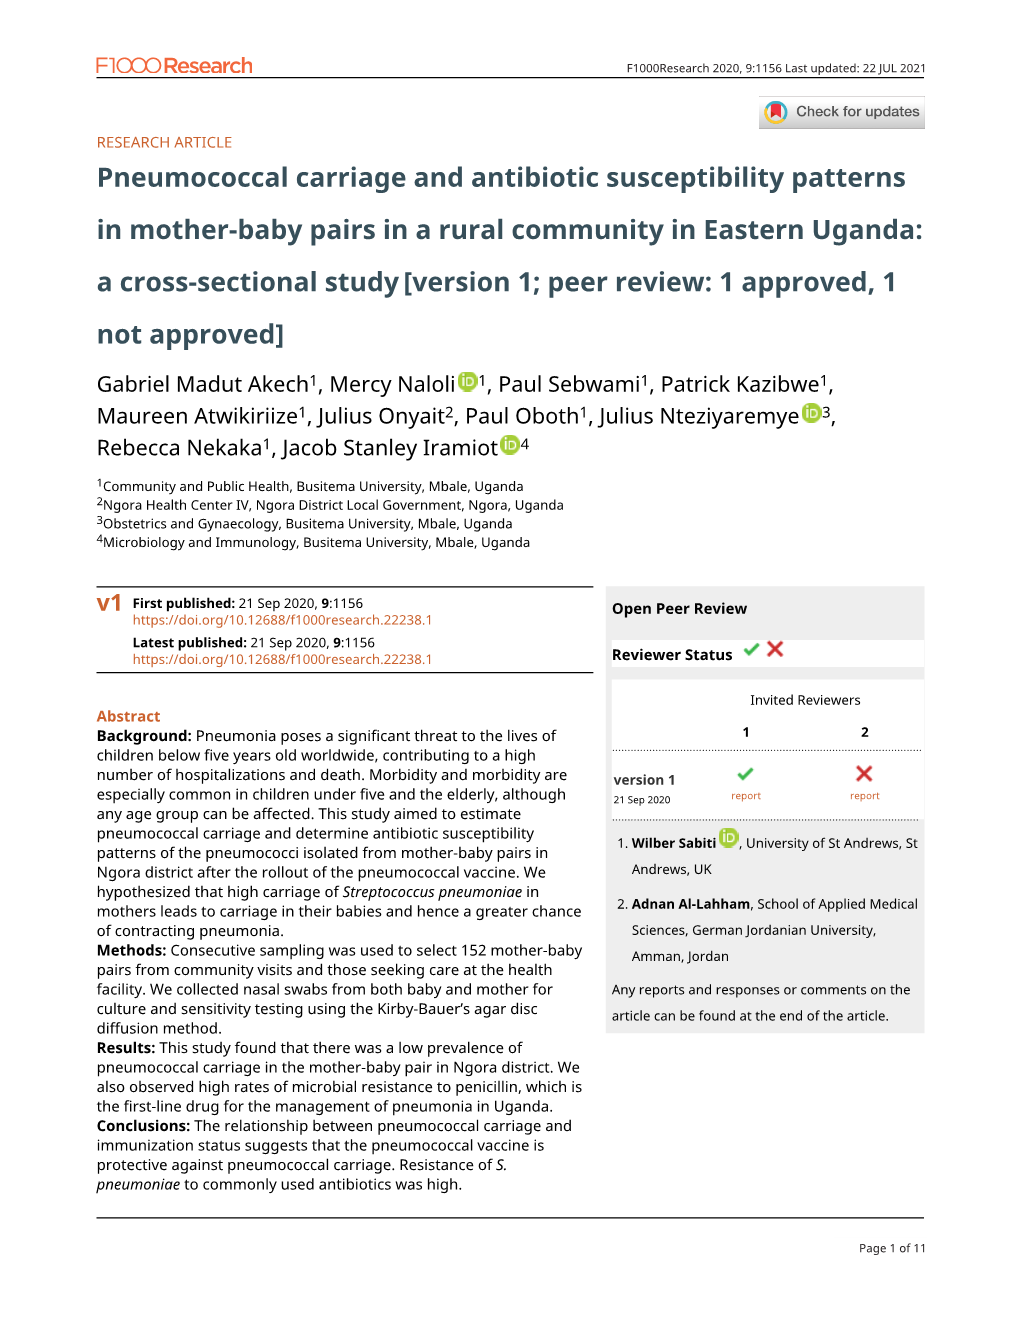 Pneumococcal Carriage and Antibiotic Susceptibility